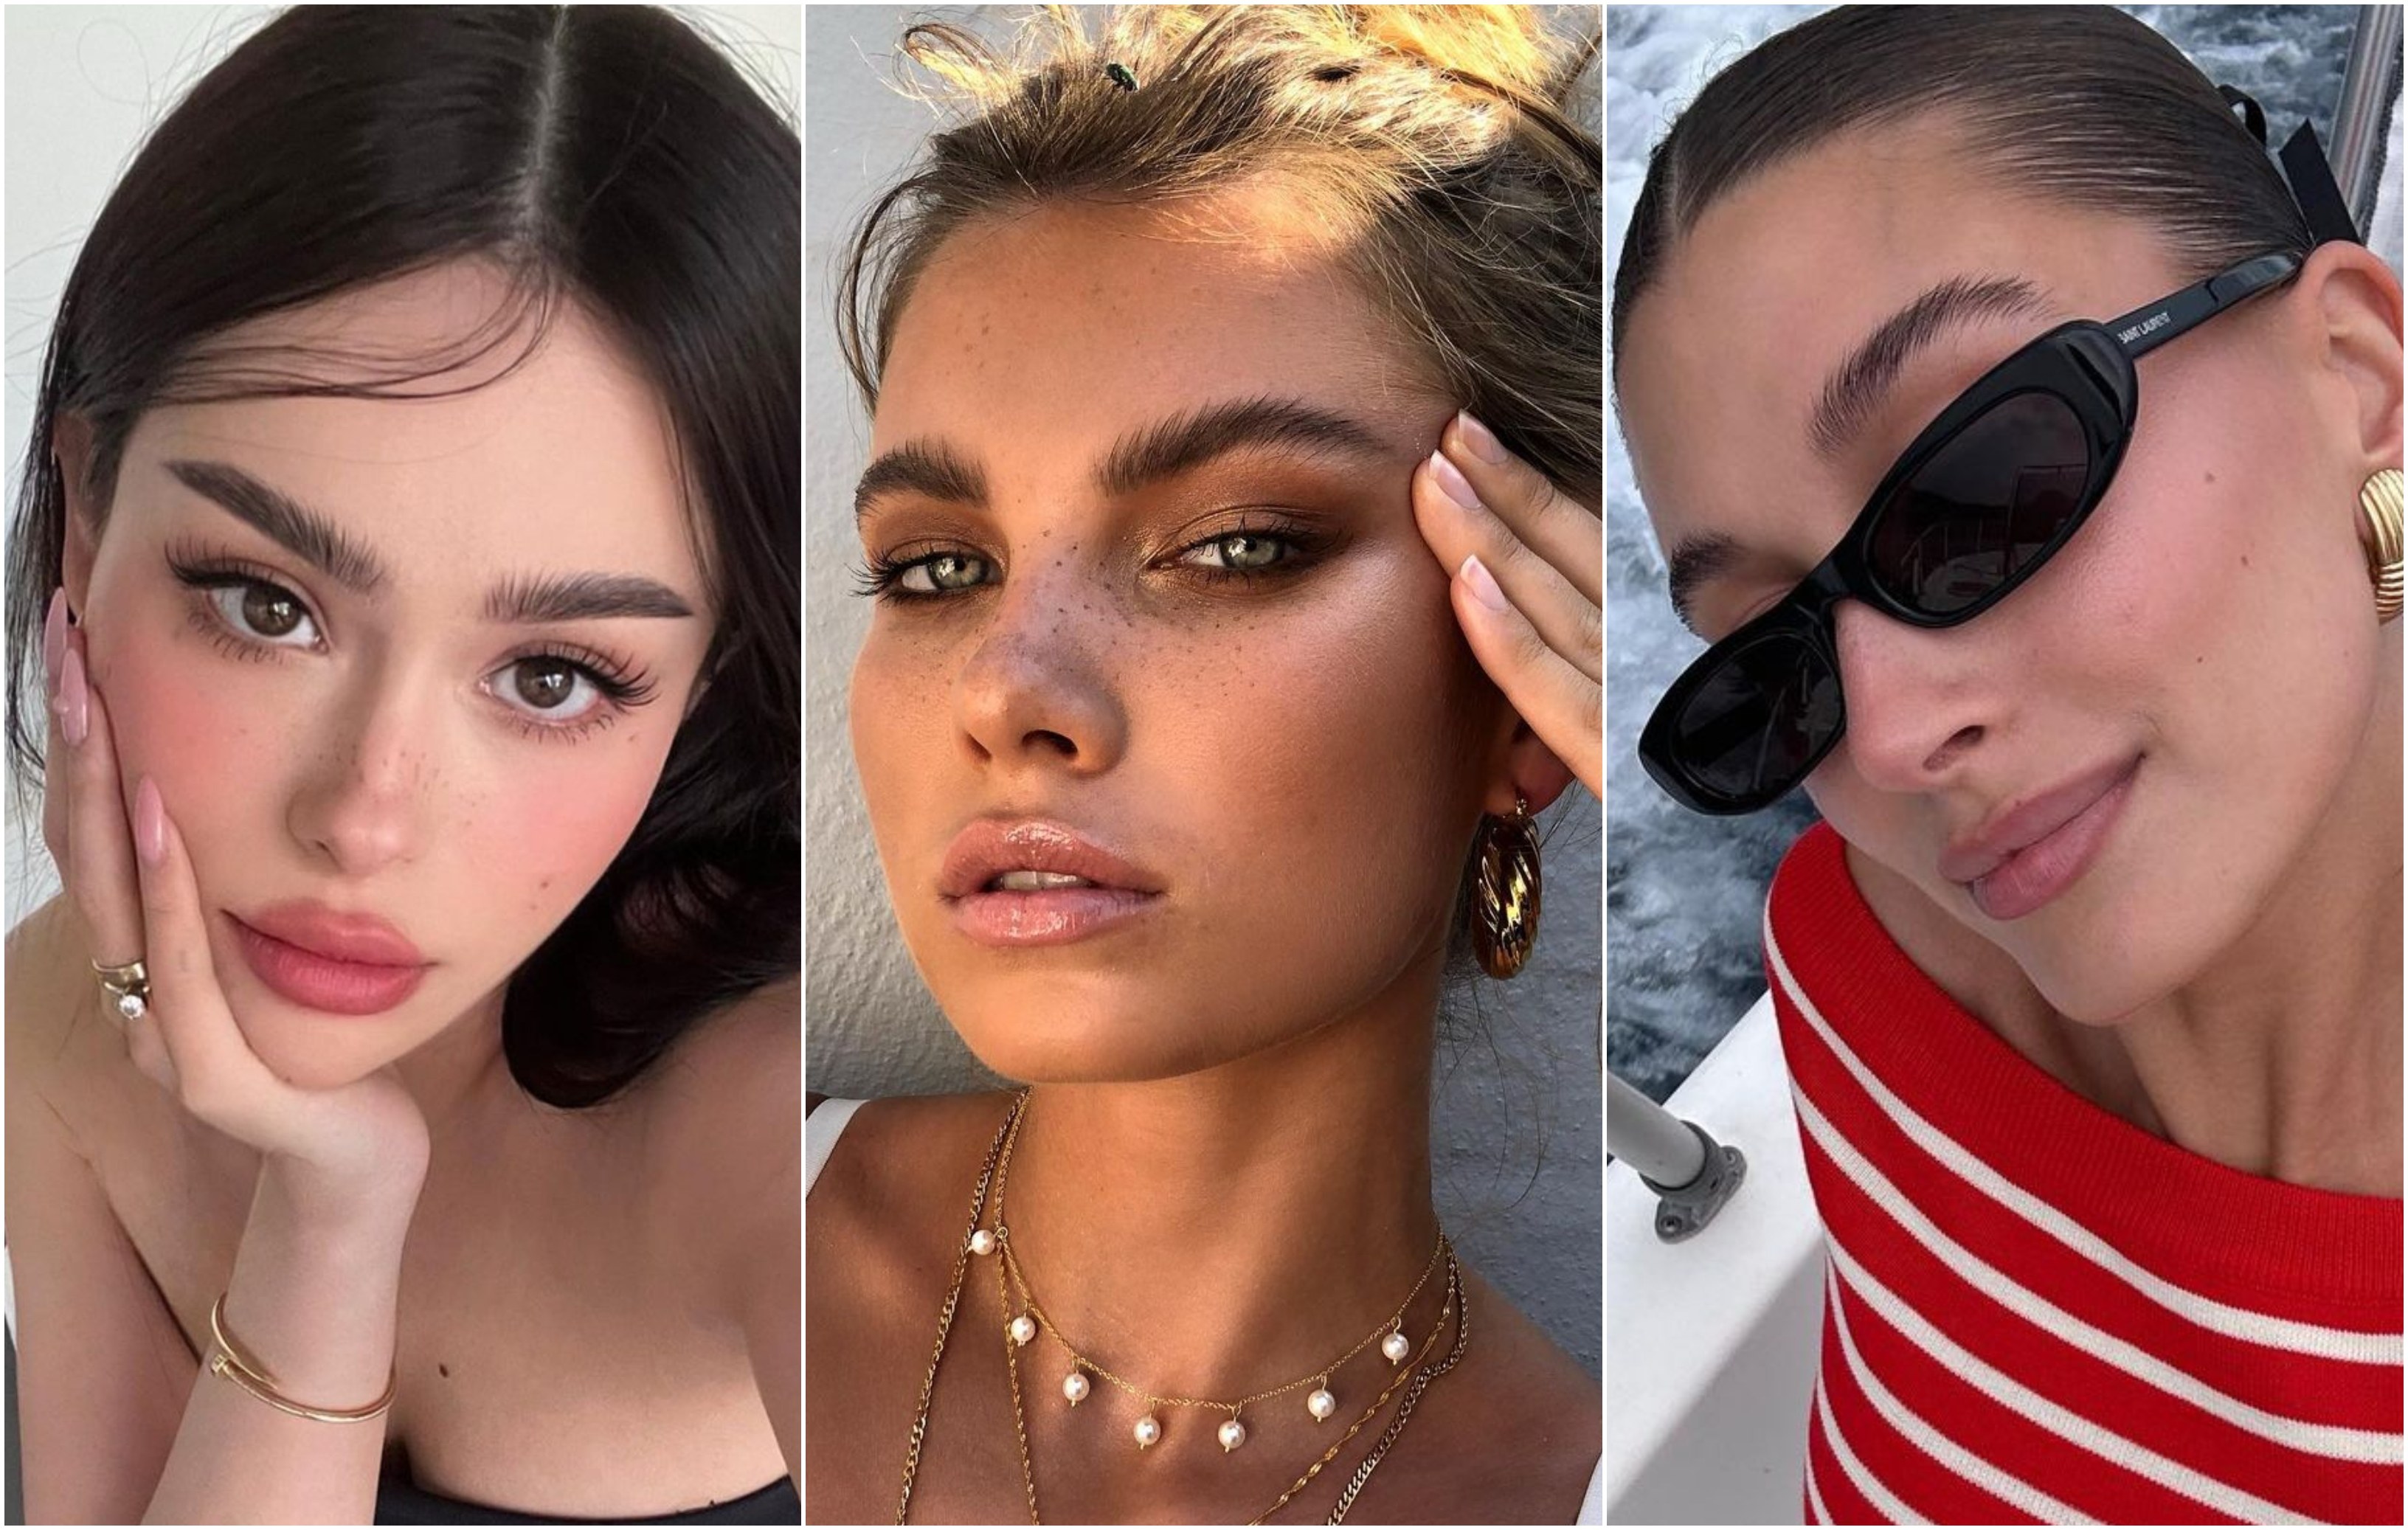 Strawberry girl make-up, latte girl make-up and tomato girl summer are among this year’s hottest beauty trends on TikTok. Photos: @hayley_bui, @taniellejaimua, @haileybieber/Instagram